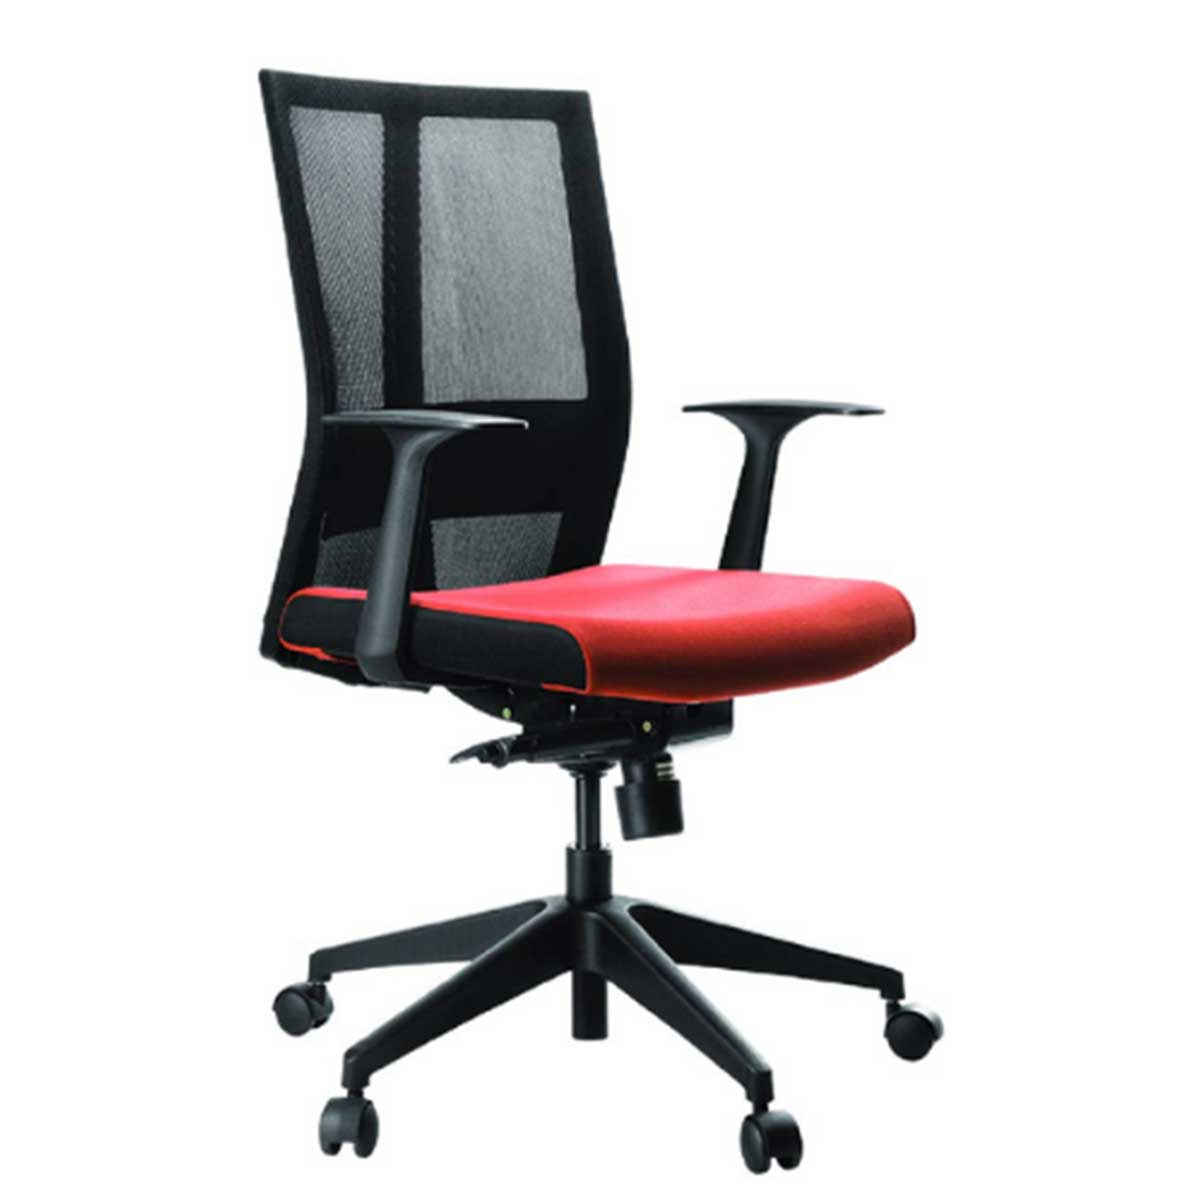 Conference Chair Manufacturers, Suppliers in Faridabad